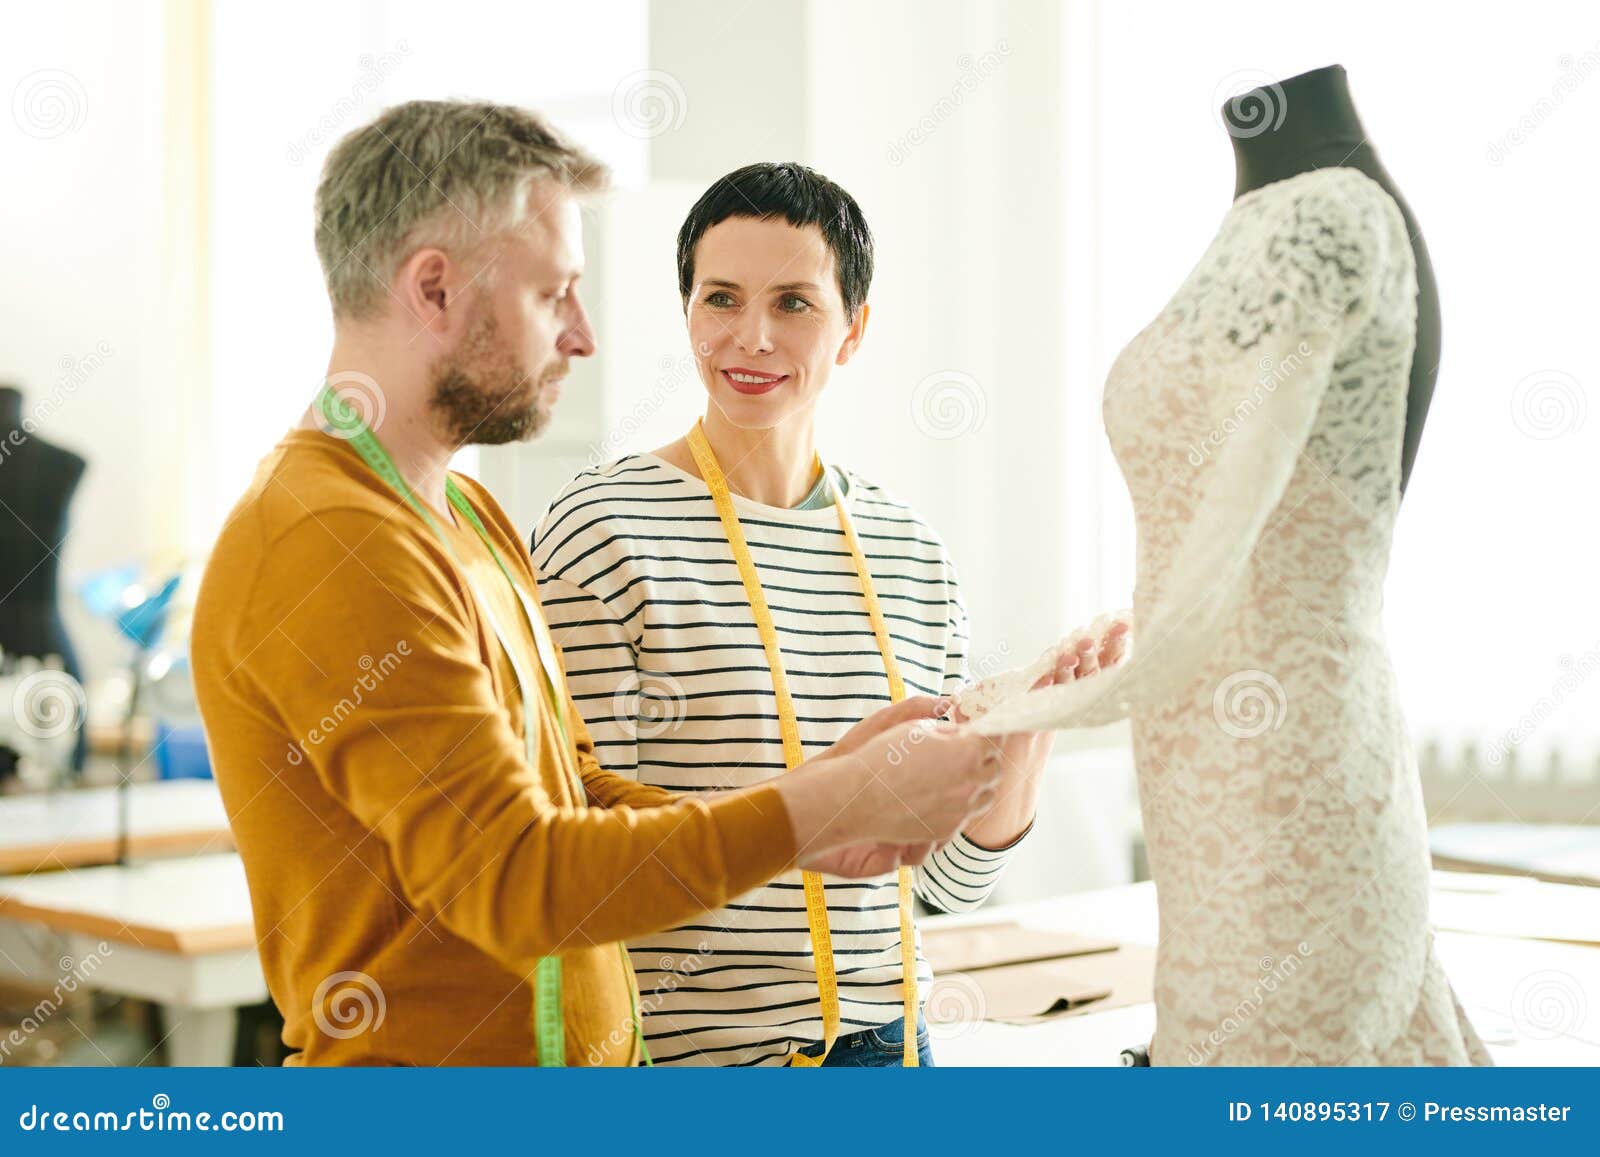 Tailors consulting stock image. Image of lace, colleague - 140895317